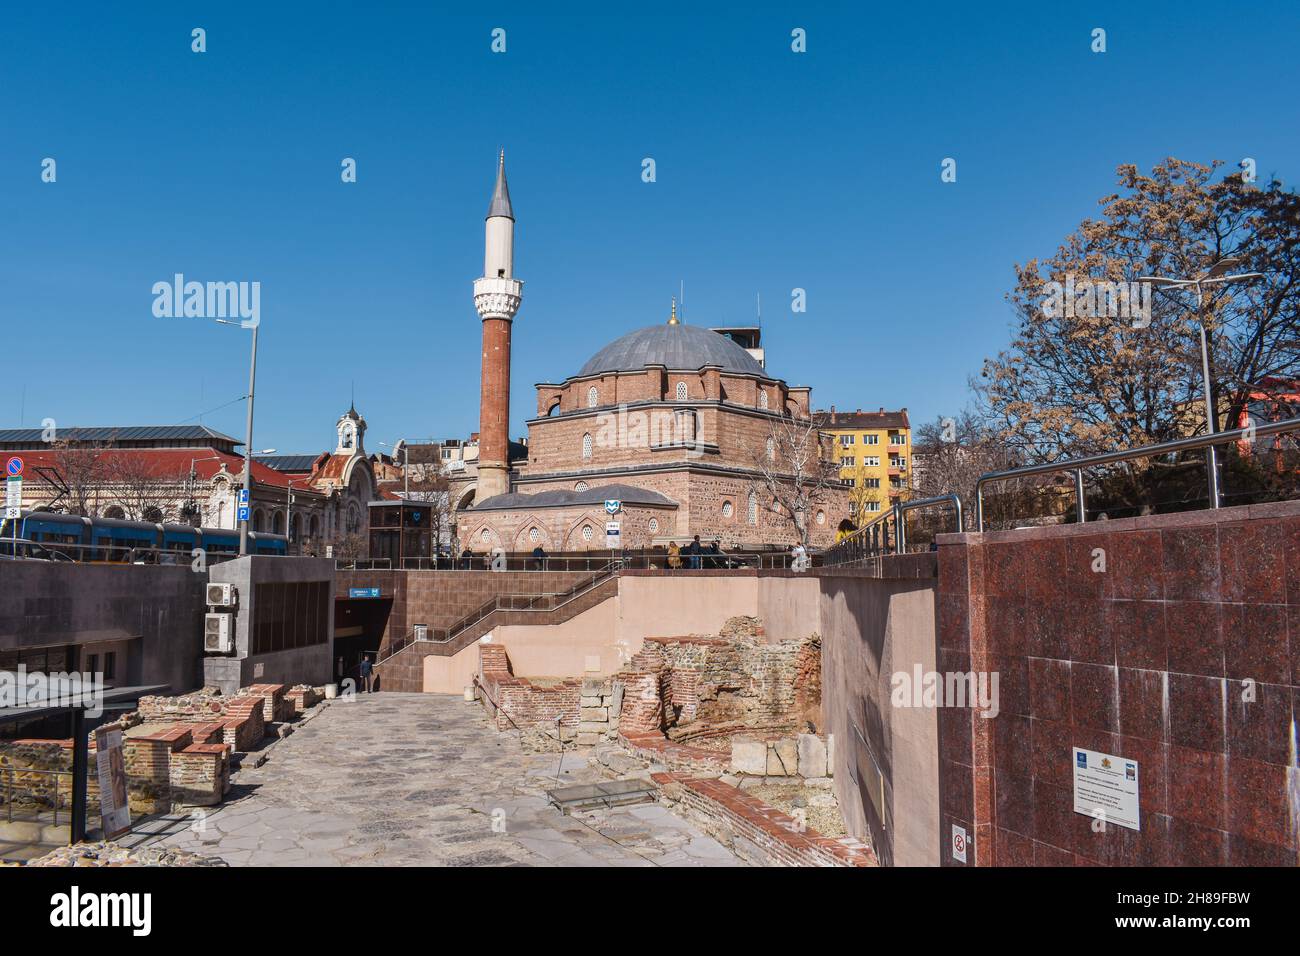 Sofia, Bulgaria - March 4, 2020: The Banya Bashi Mosque in the Bulgarian capital. Center of the city with the ruins of Serdica, clear blue sky Stock Photo